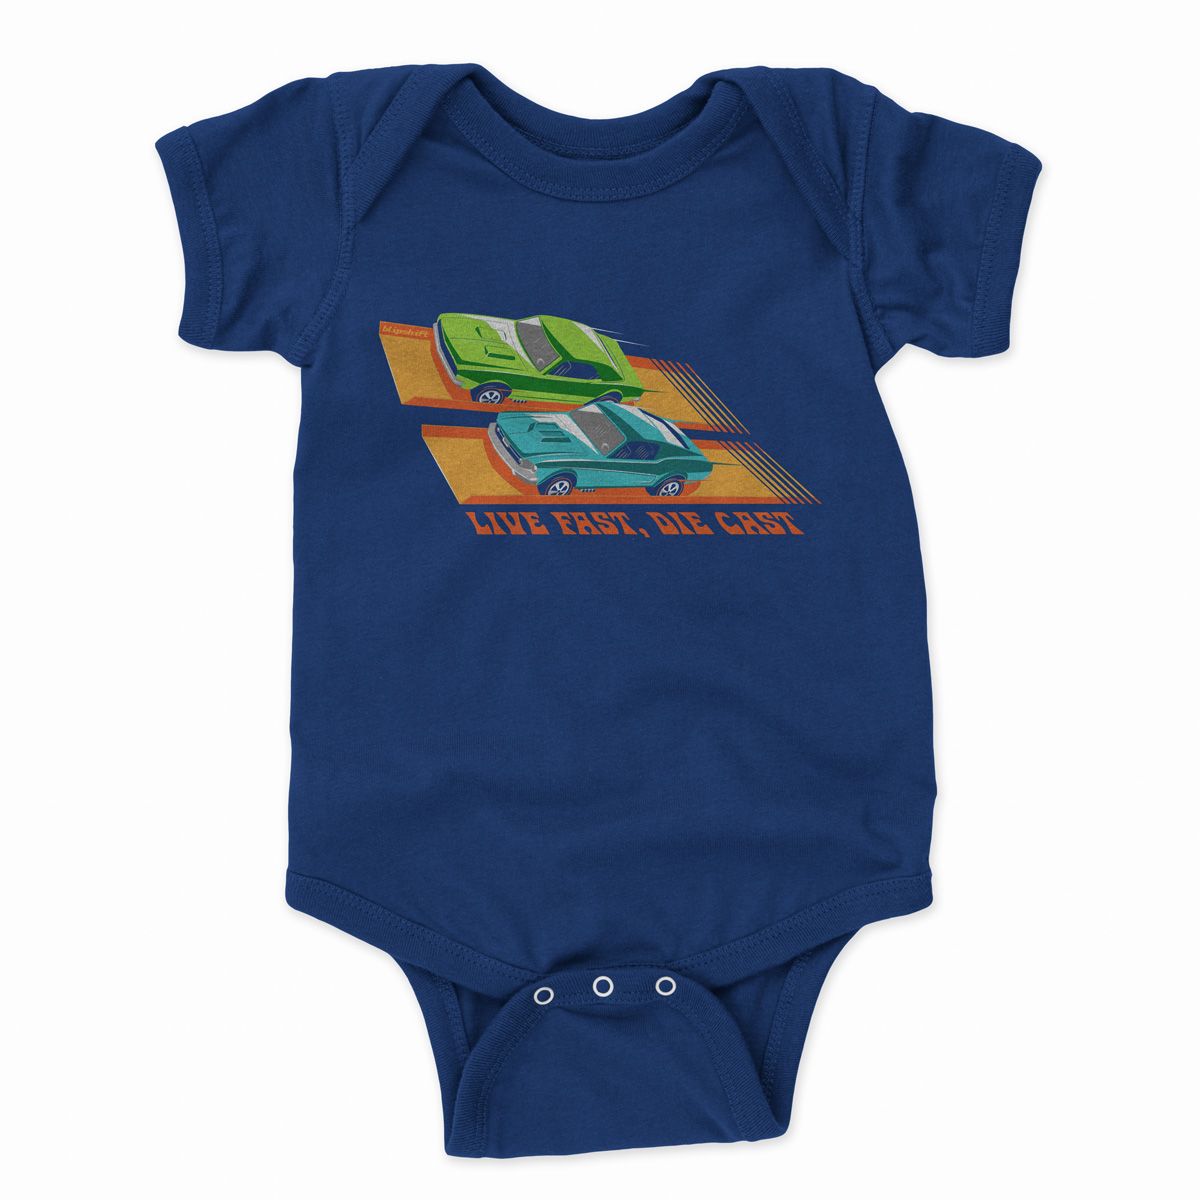 Baby & toddler clothing, Infant bodysuit, Product, Clothing, Baby Products, T-shirt, Sleeve, Vehicle, Car, Top, 